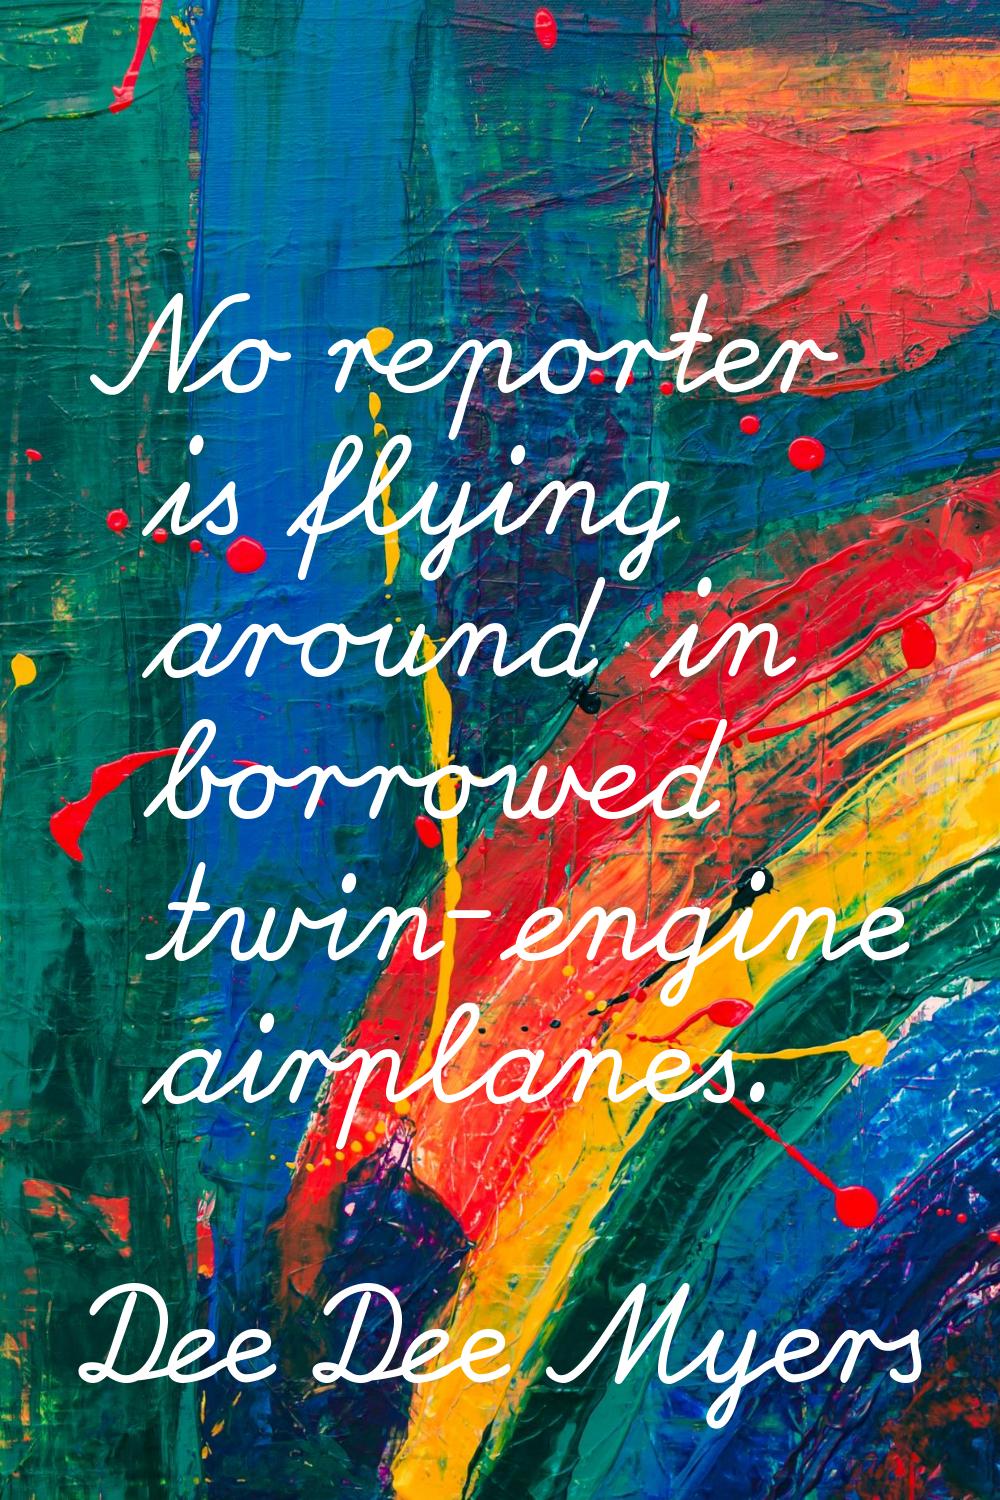 No reporter is flying around in borrowed twin-engine airplanes.